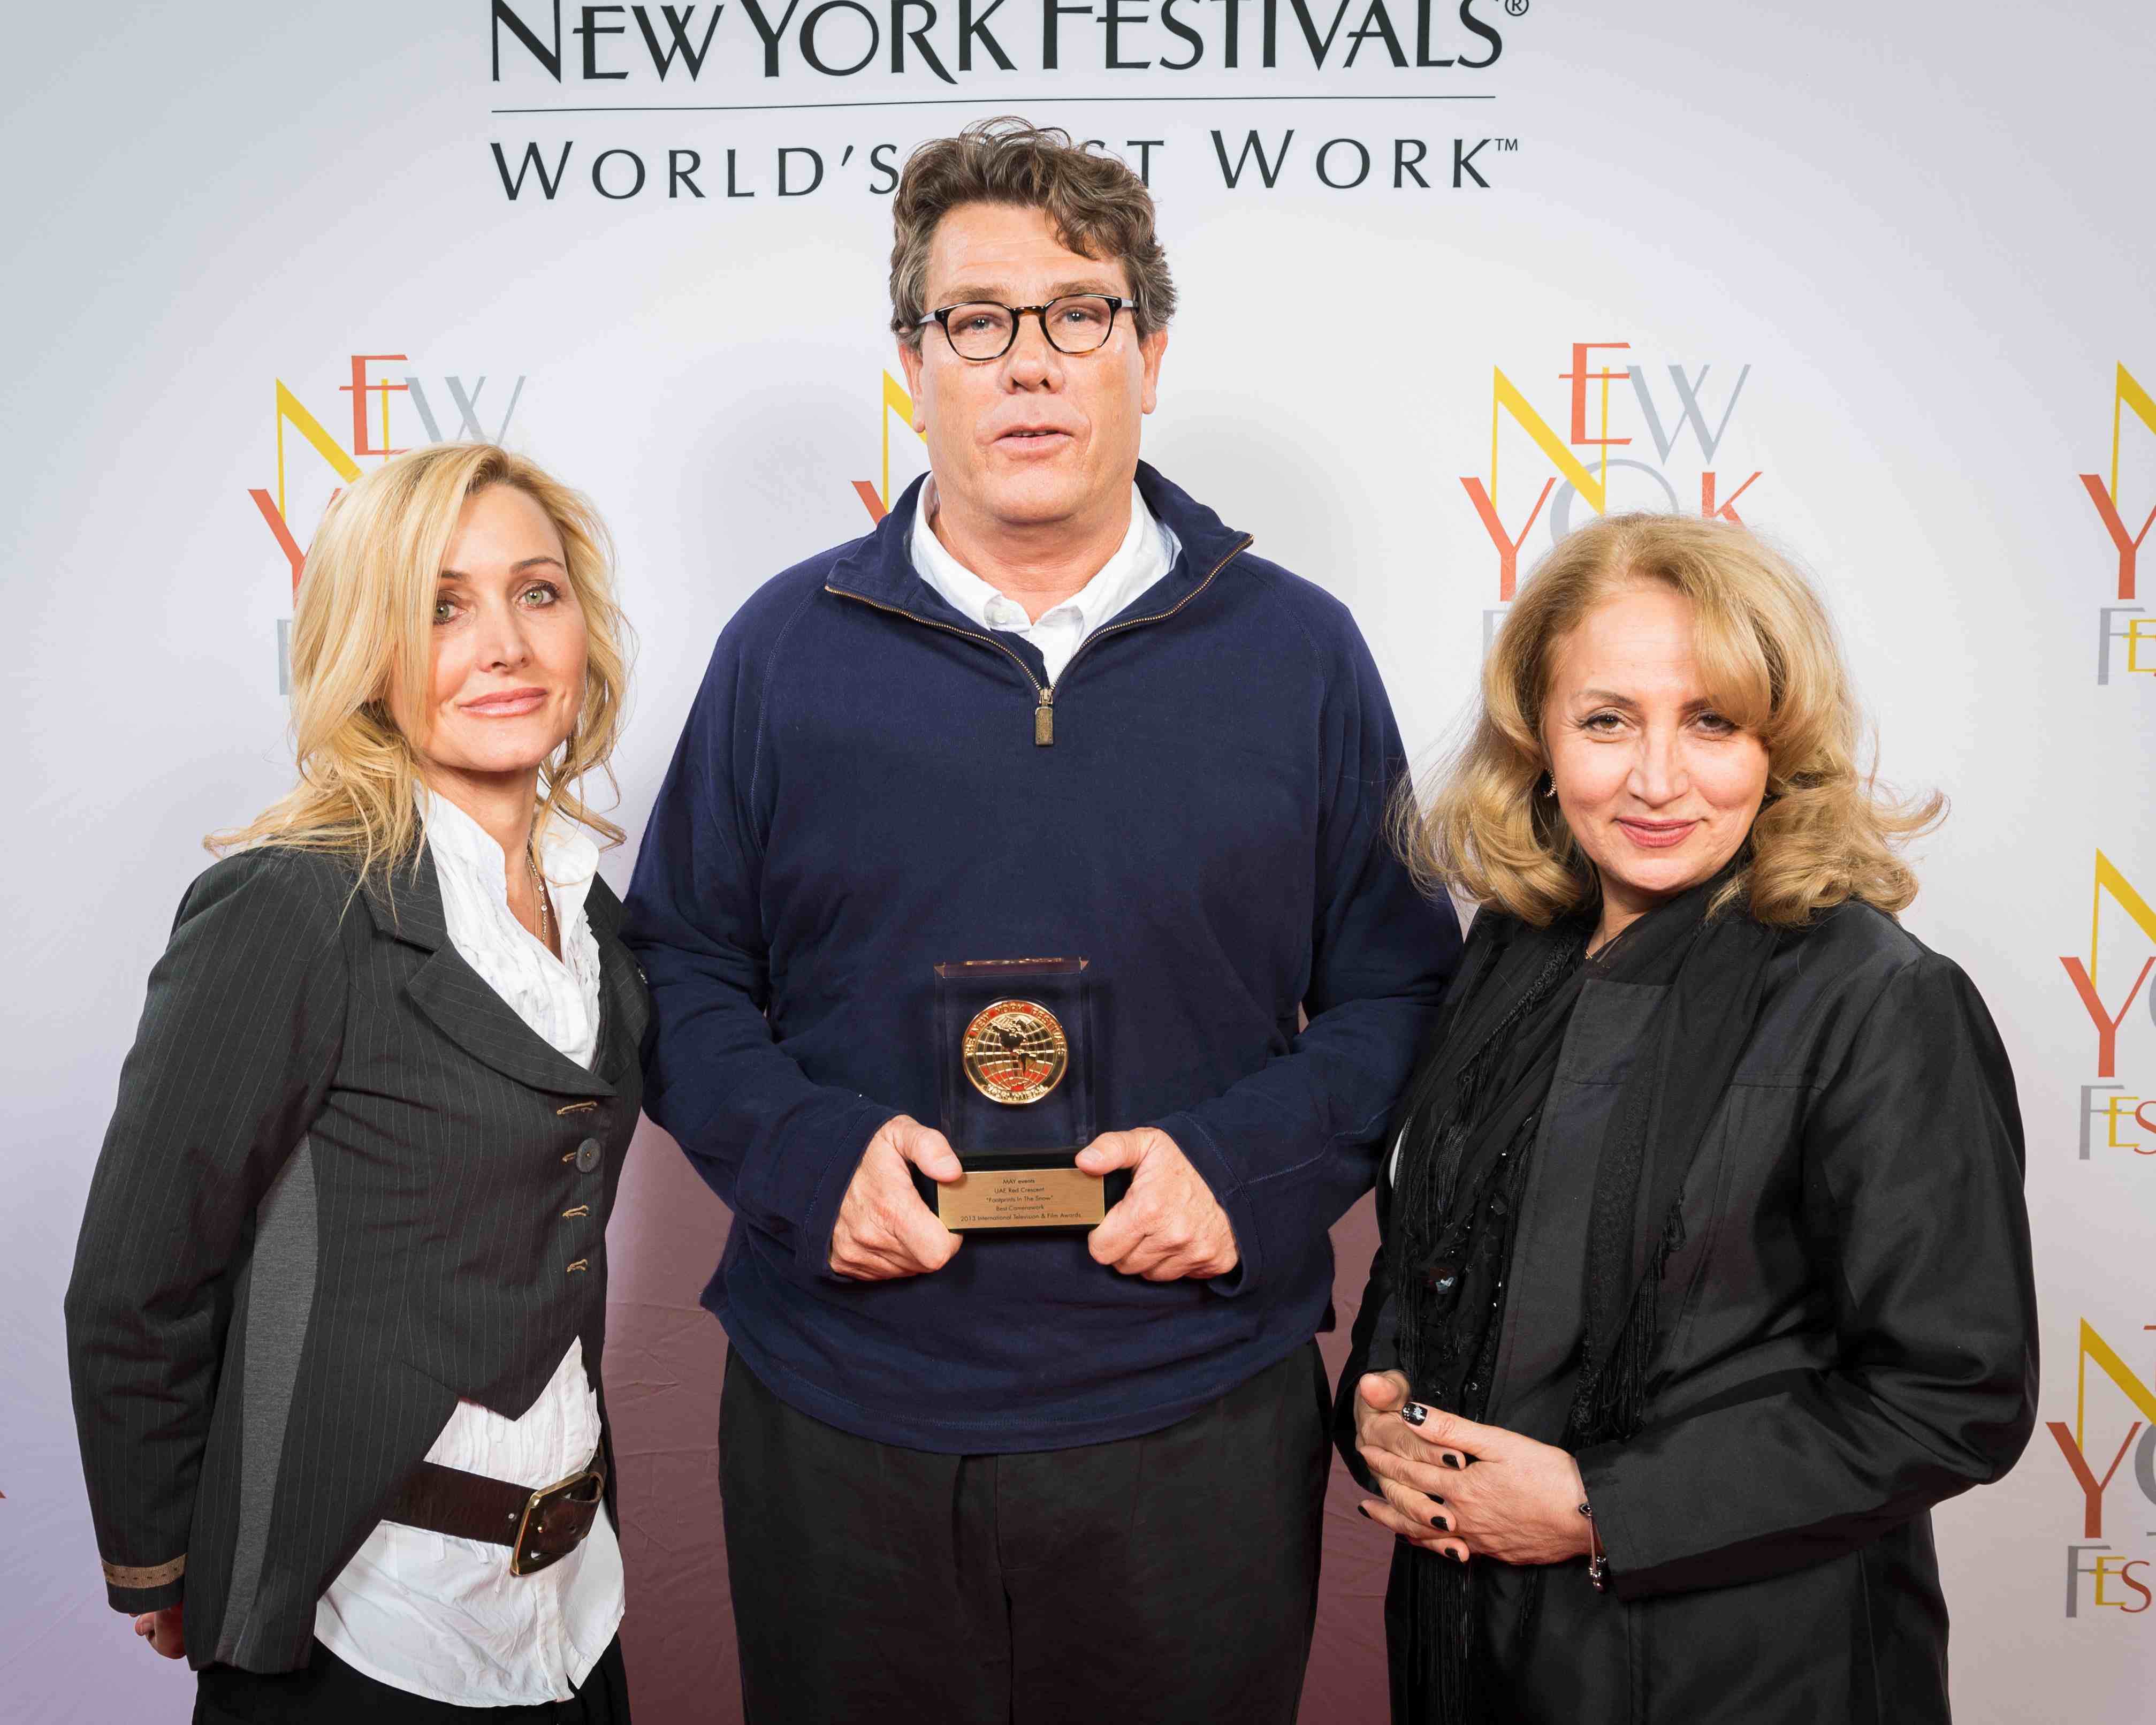 Win for footprints in the snow: New York Festival